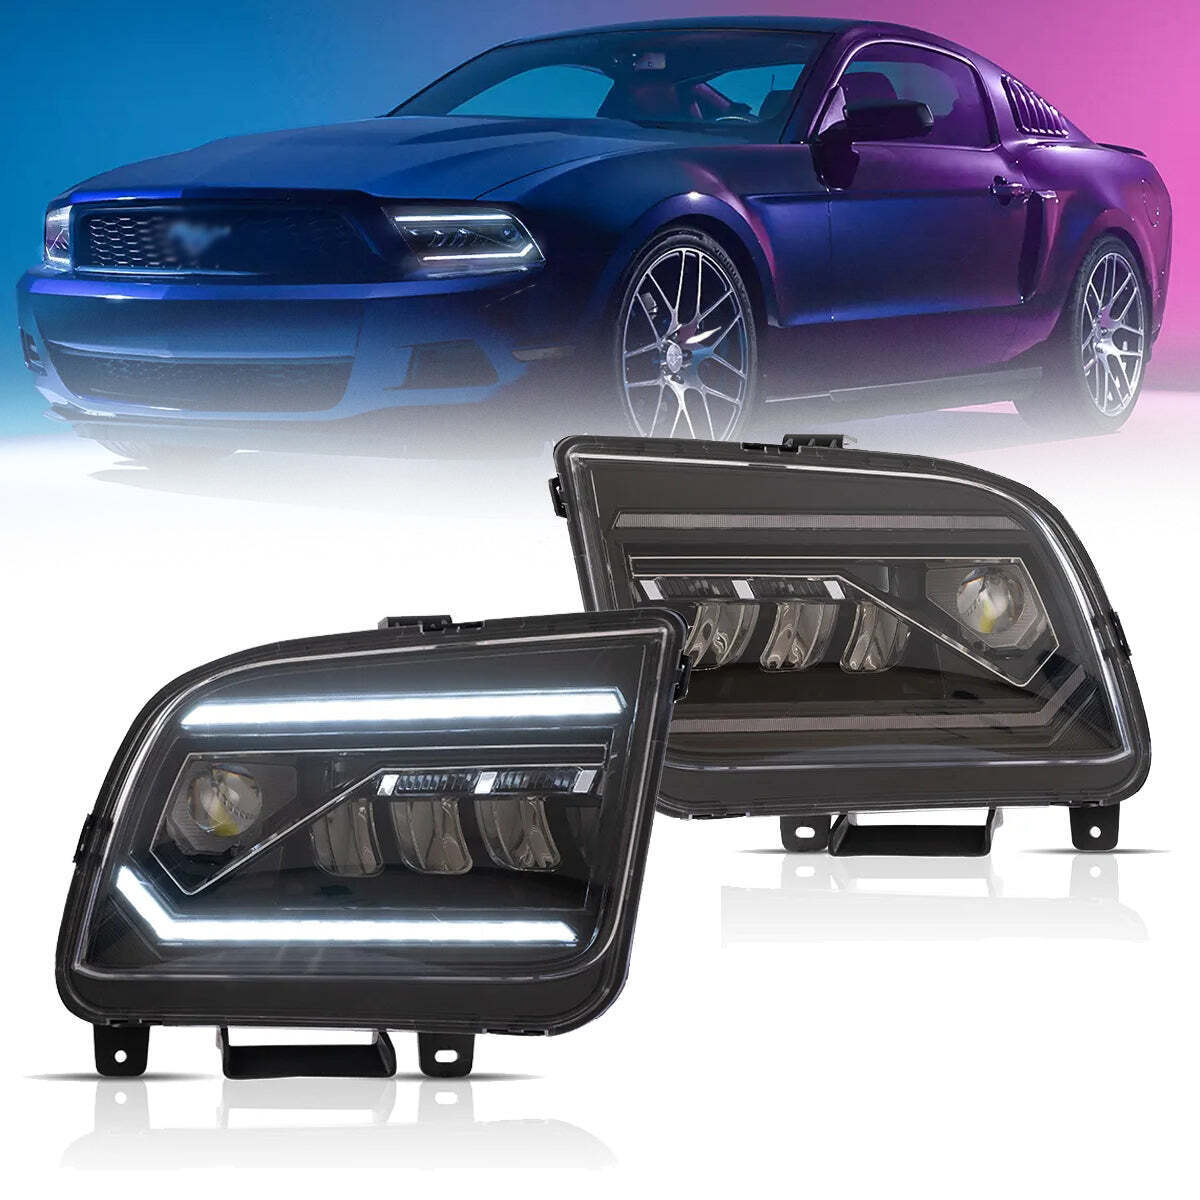 VLAND LED Headlights For Ford Mustang 2005-2009 Front Lights W/StartUp Animation